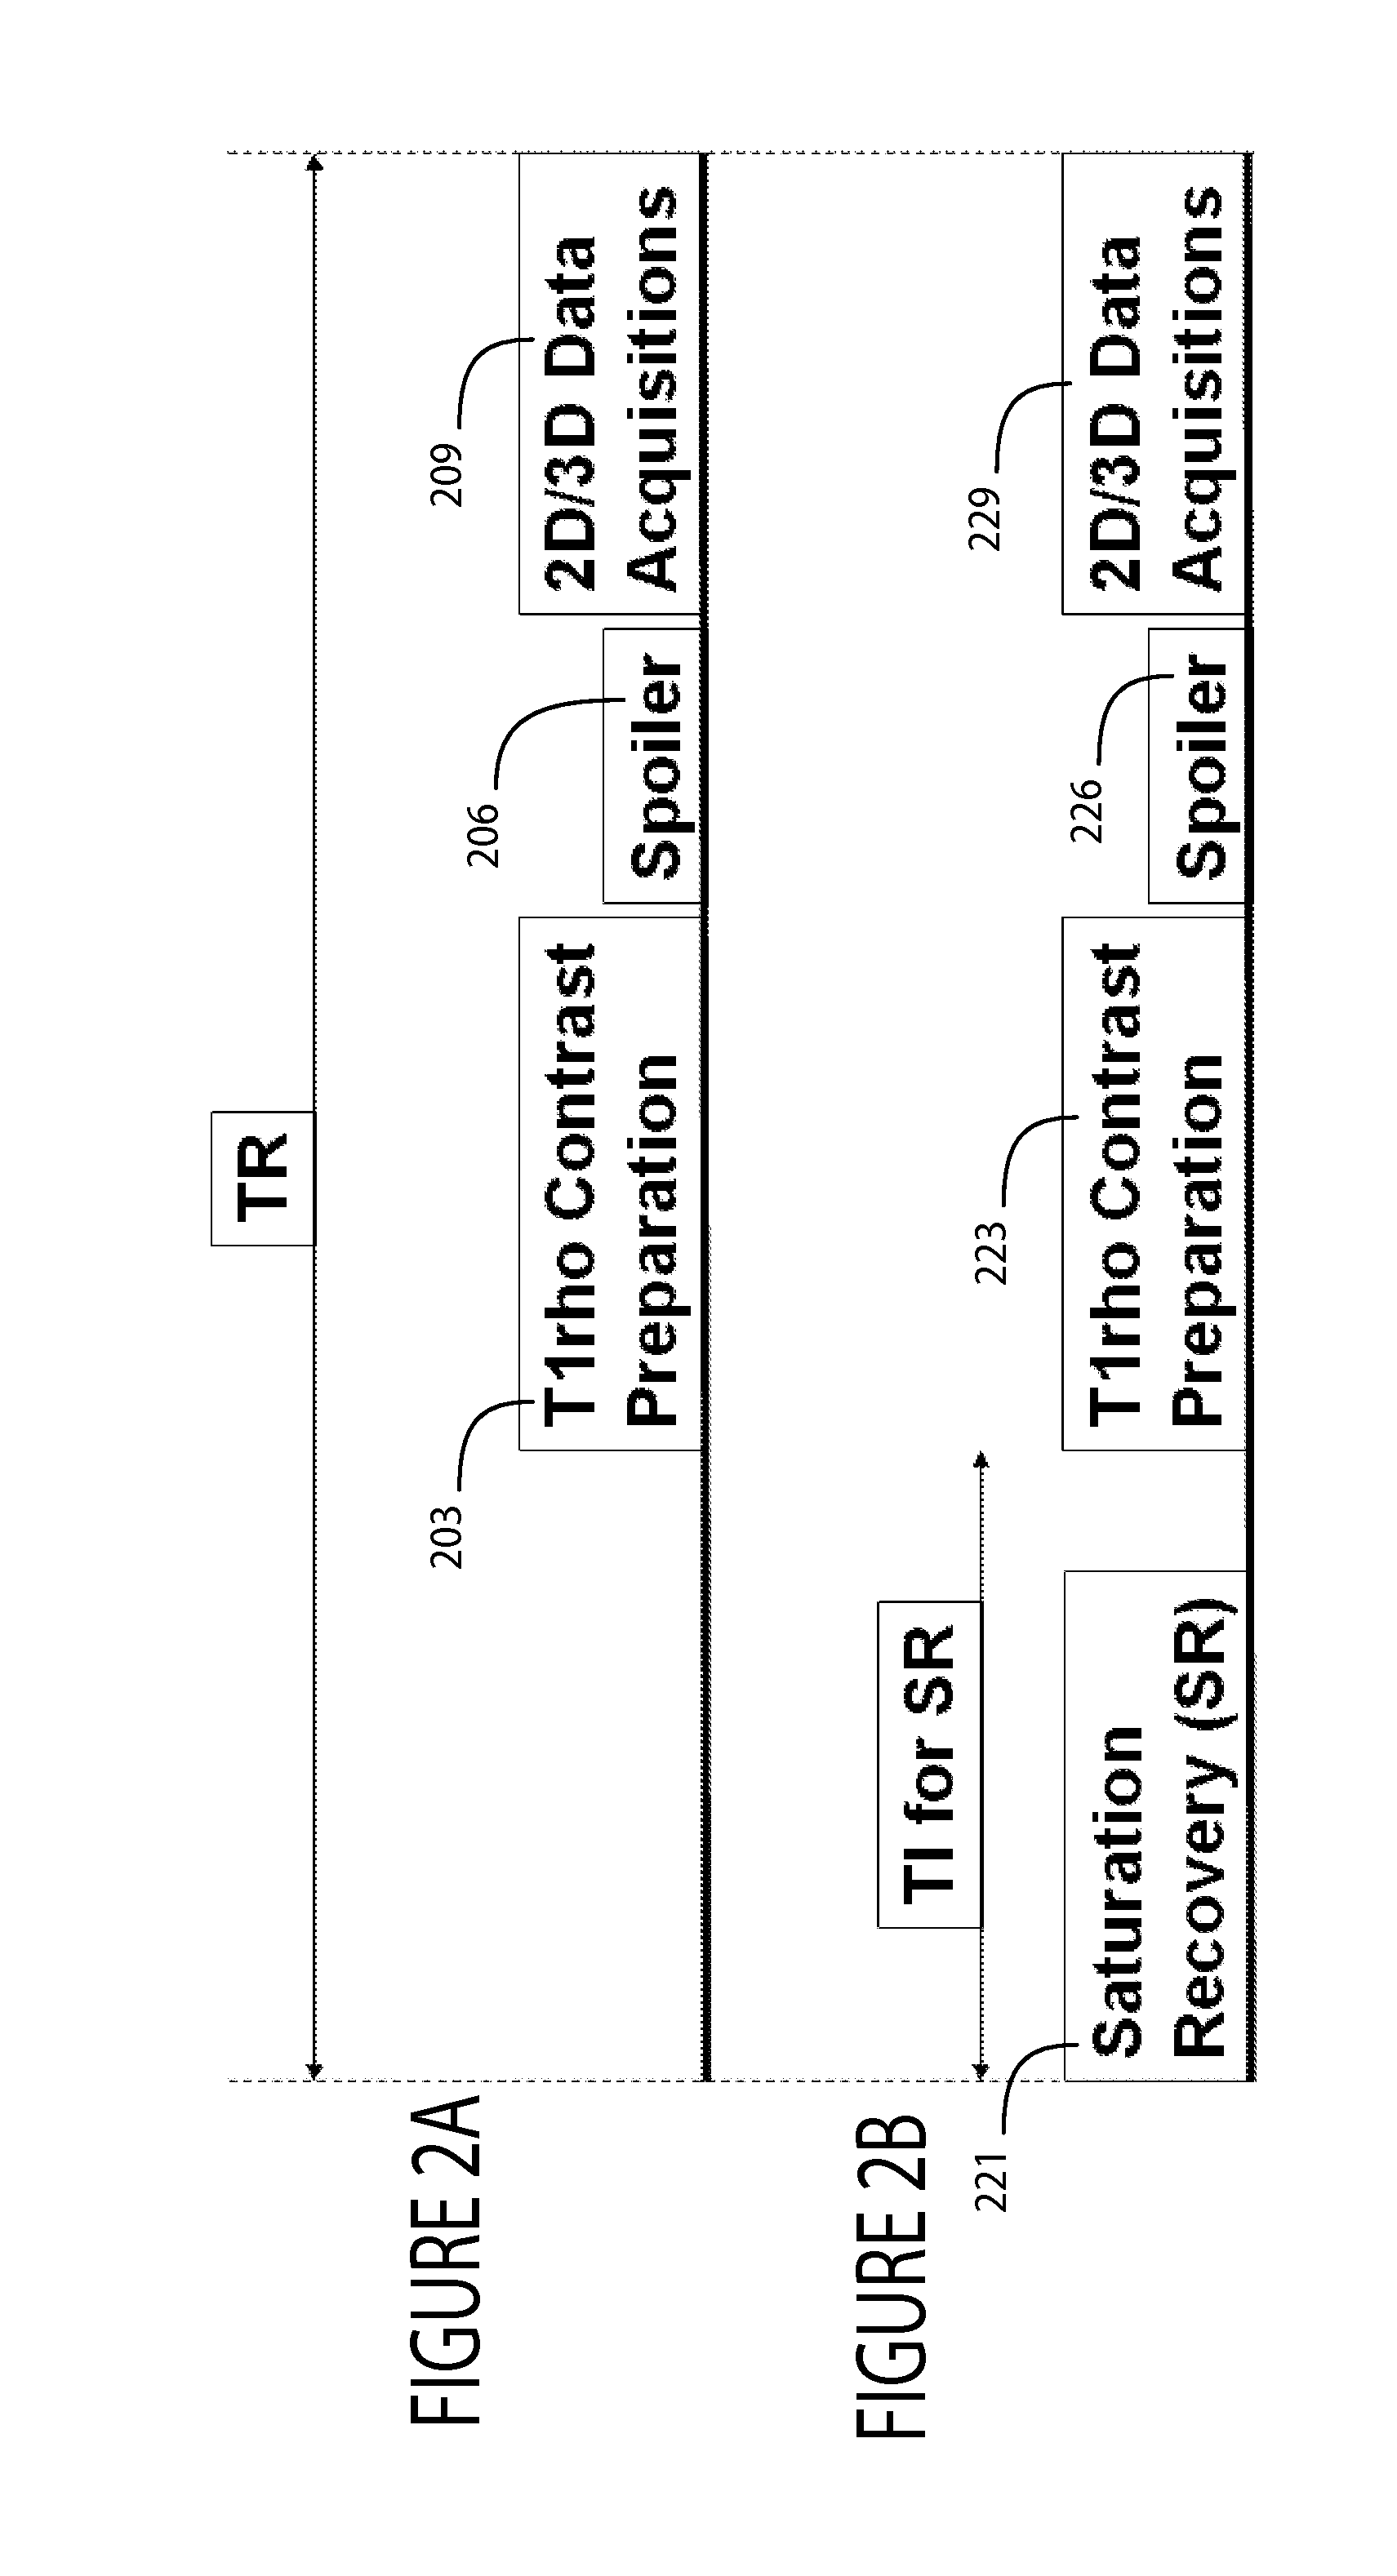 System for Reducing Artifacts in Imaging in the Presence of a Spin-lock Radio-Frequency Field